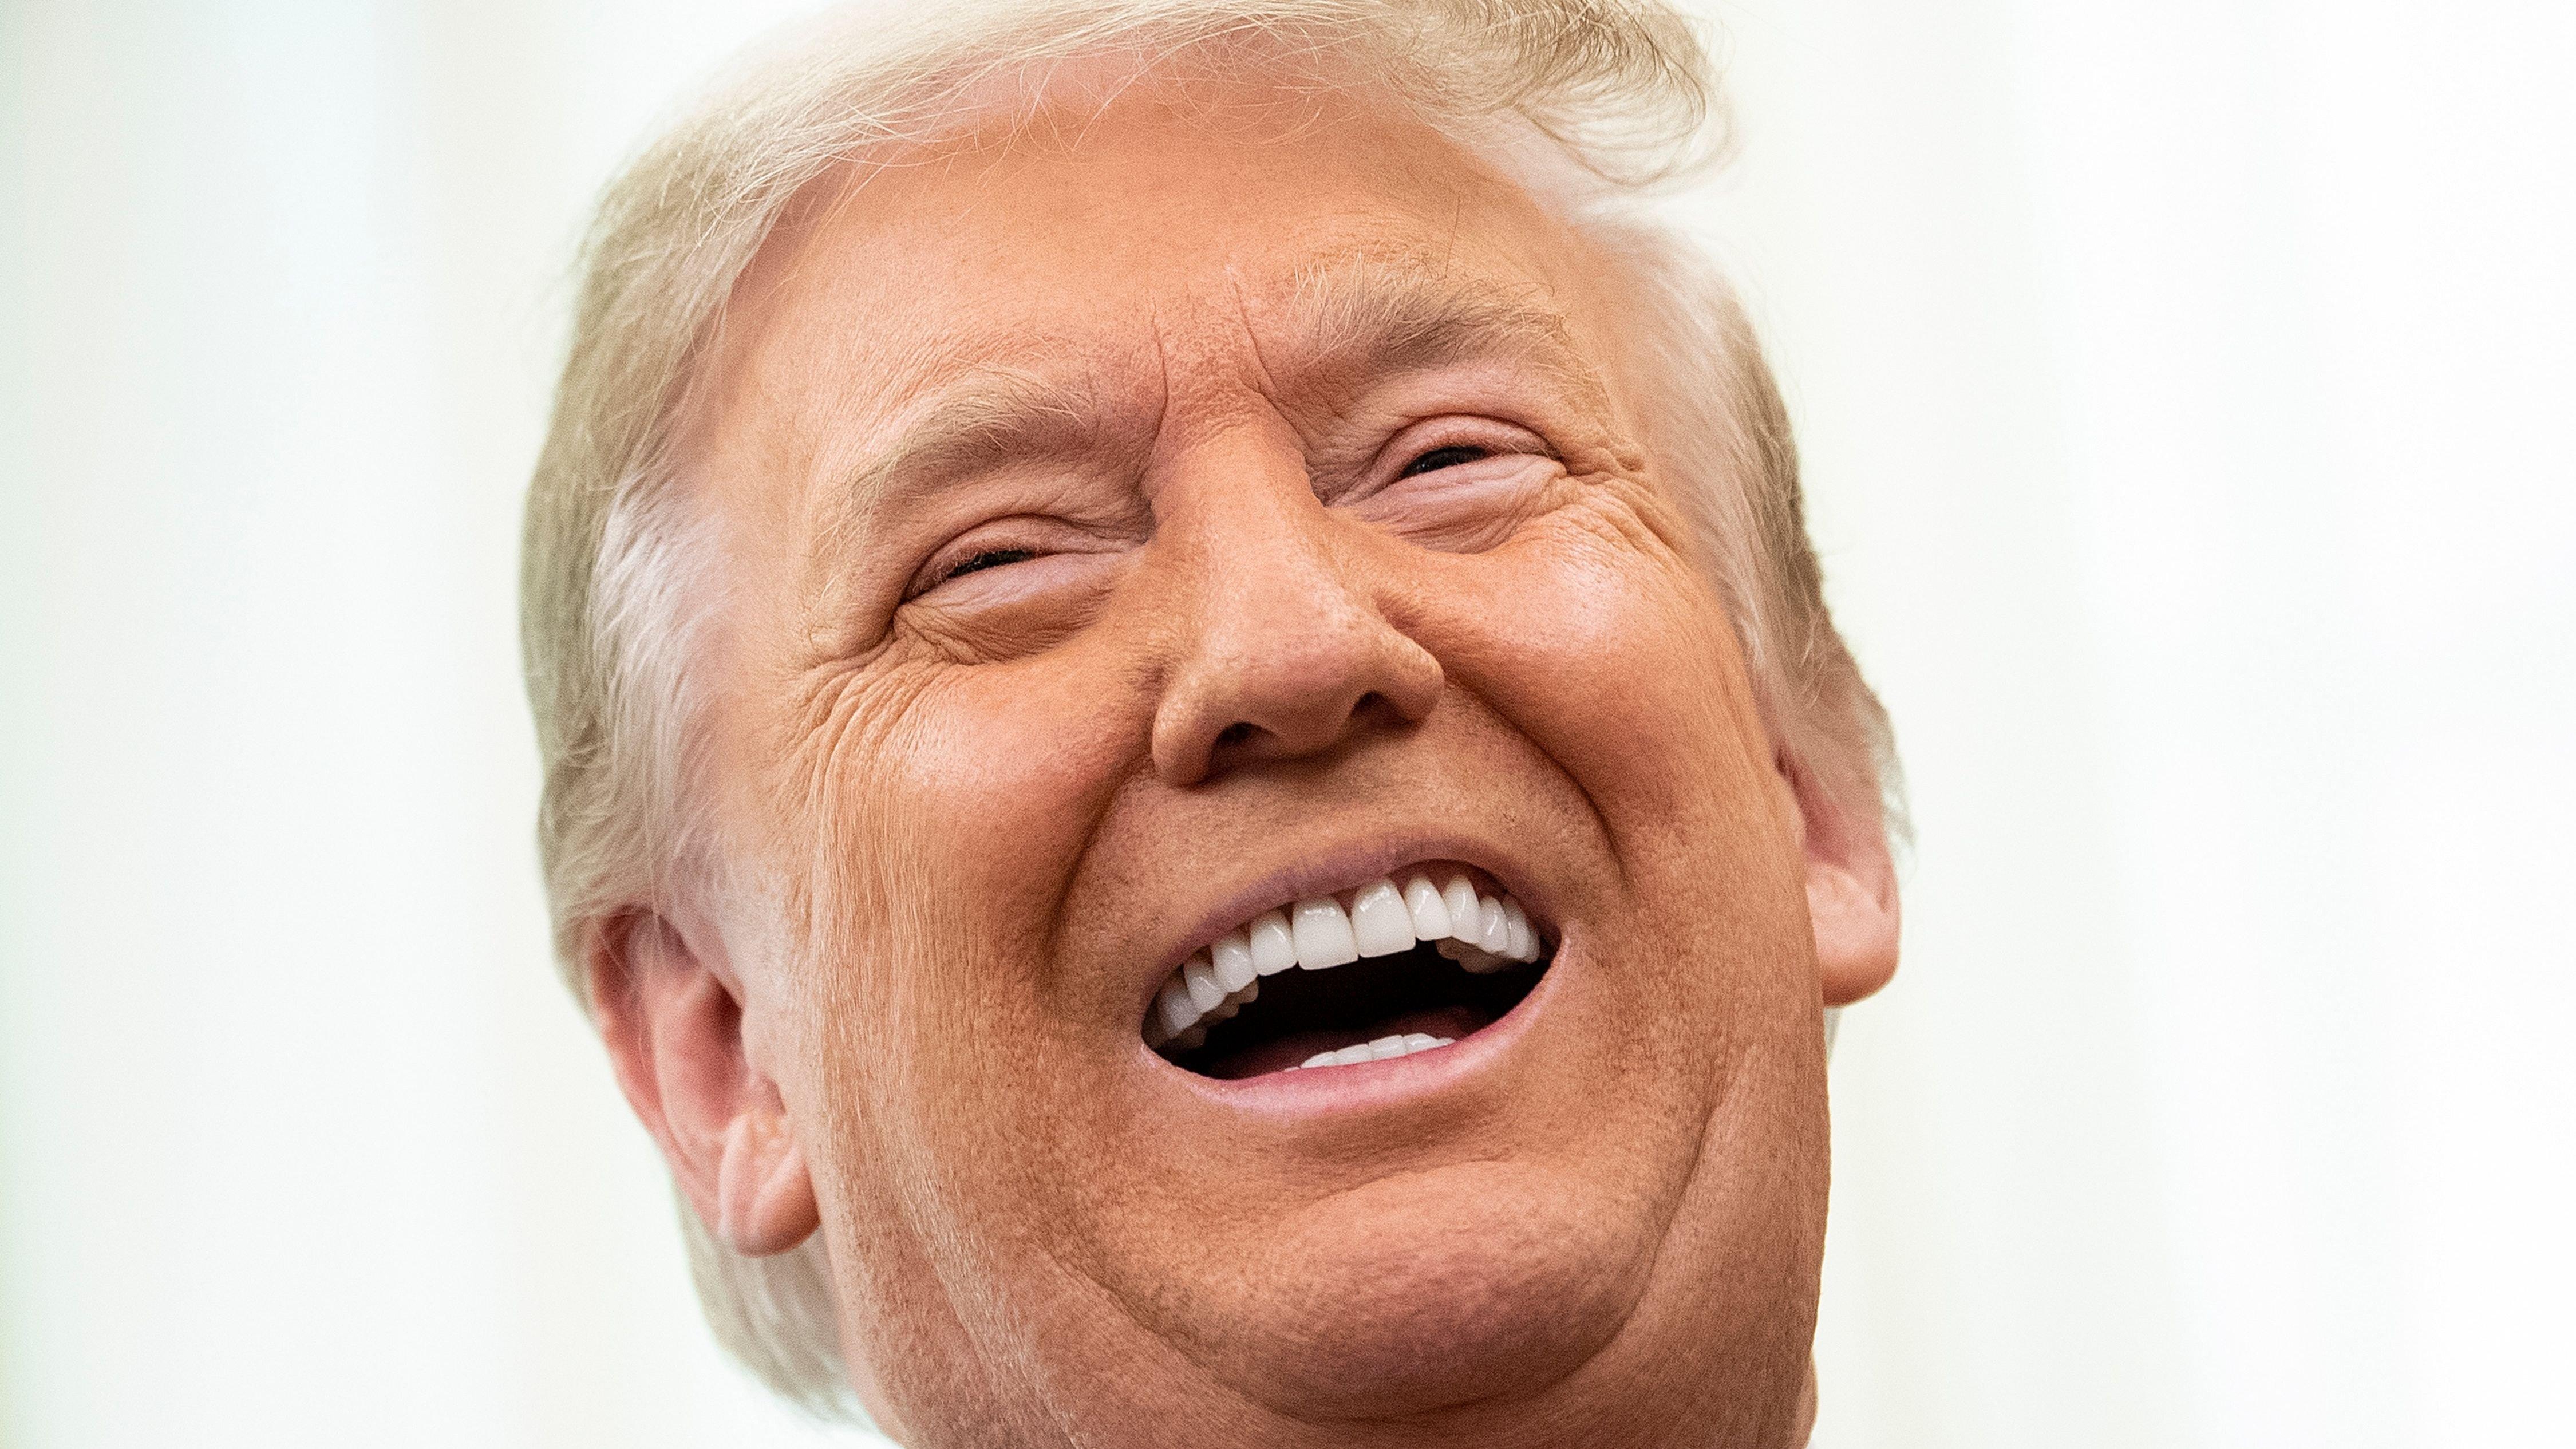 Former President Donald Trump pictured laughing